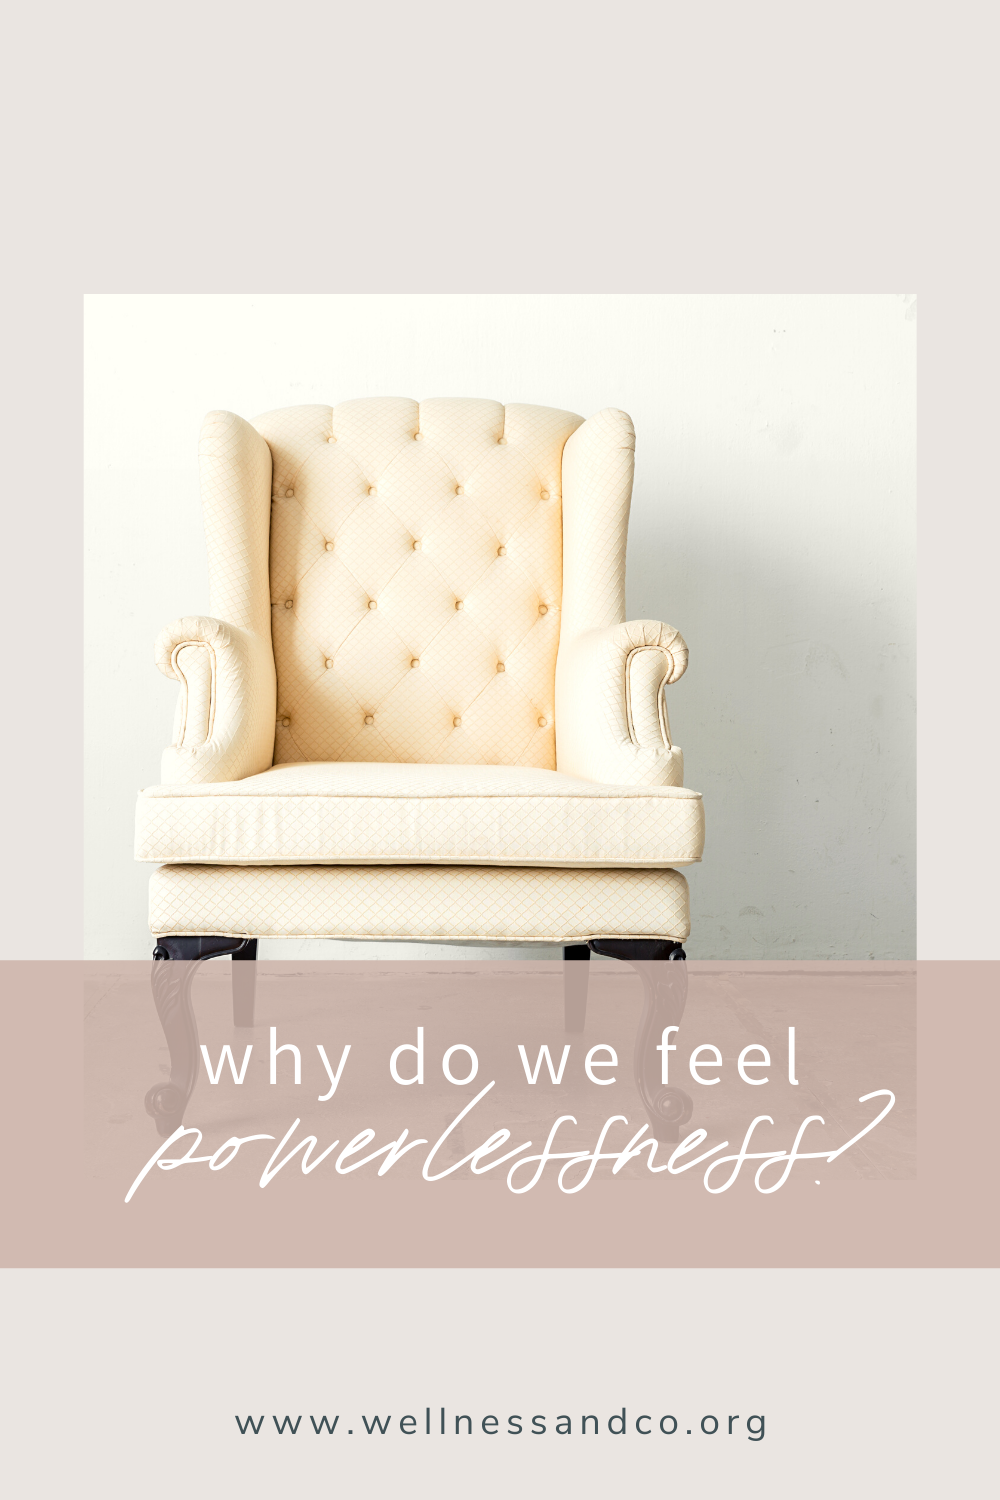 Why Do We Feel Powerlessness? | Here's the deal, clients in therapy feel a variety of things but a deeper look at what they are feeling can uncover quite a bit about their coping mechanisms, resources, and lived experiences. This post gives an insider look from the eyes of a therapist regarding a client with incredible loss. Read on...